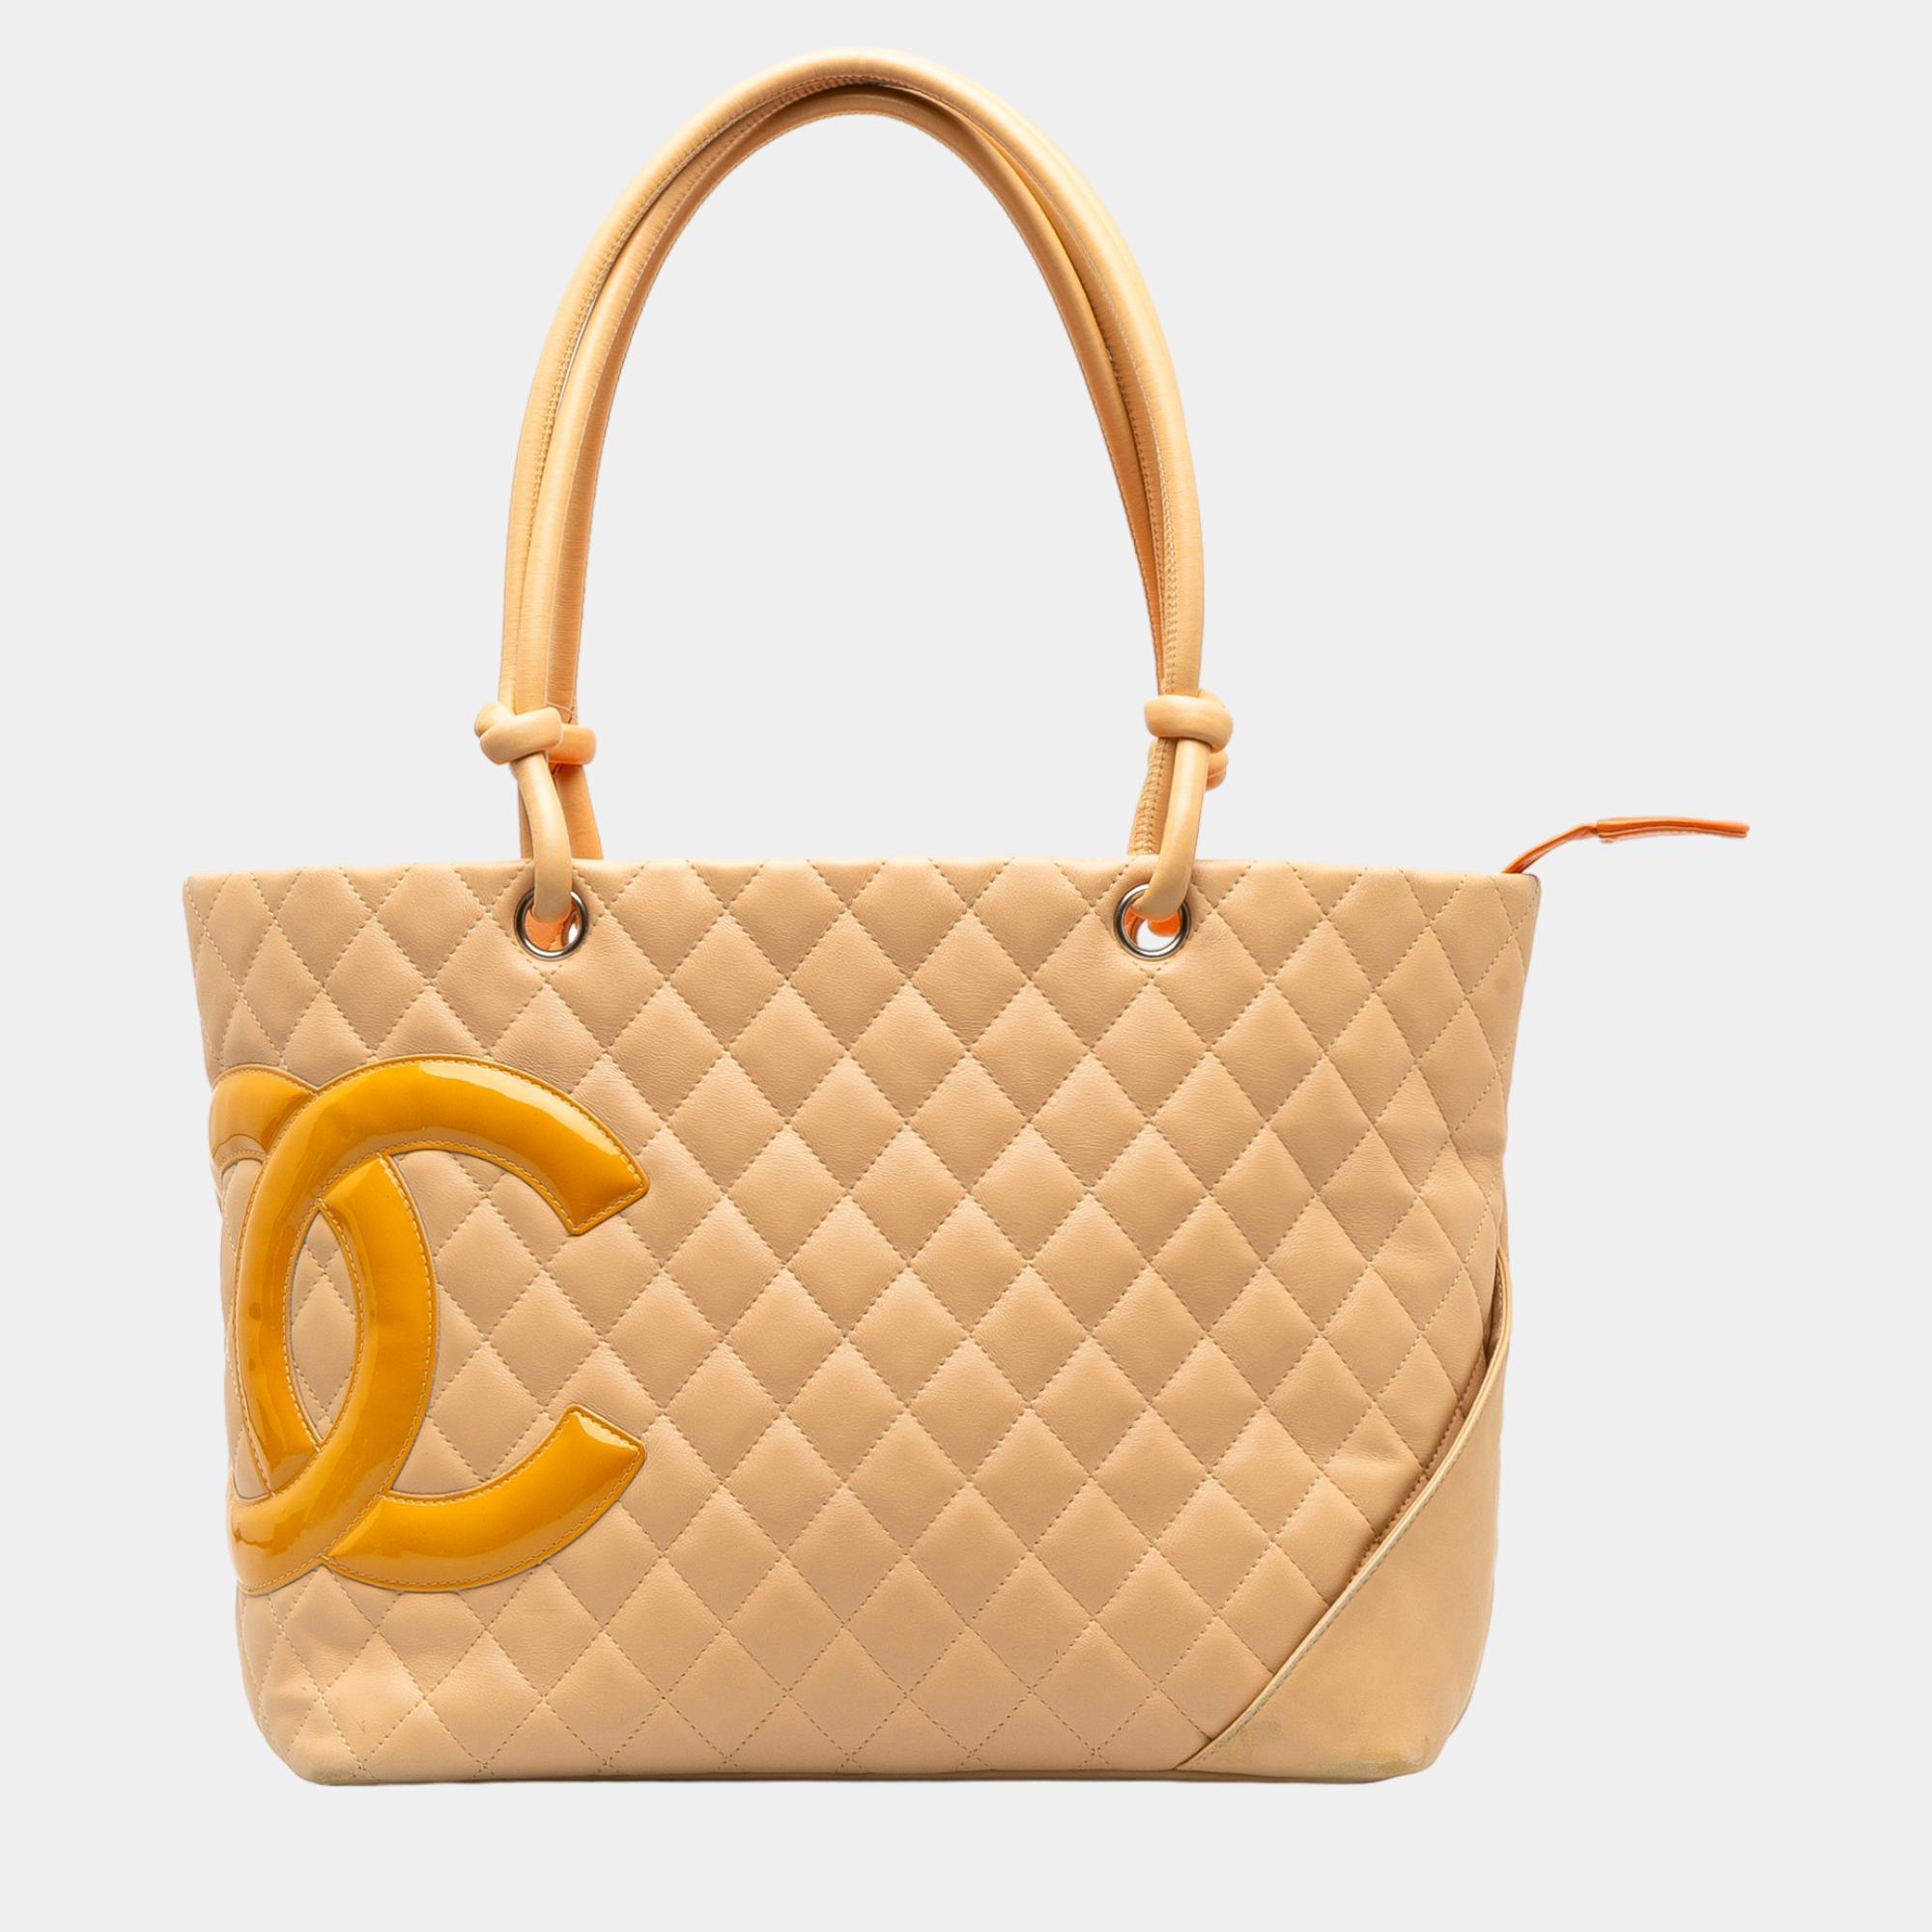 The Cambon Ligne tote features a quilted lambskin leather body rolled leather handles a top zip closure an exterior back slip pocket and an interior zip pocket.